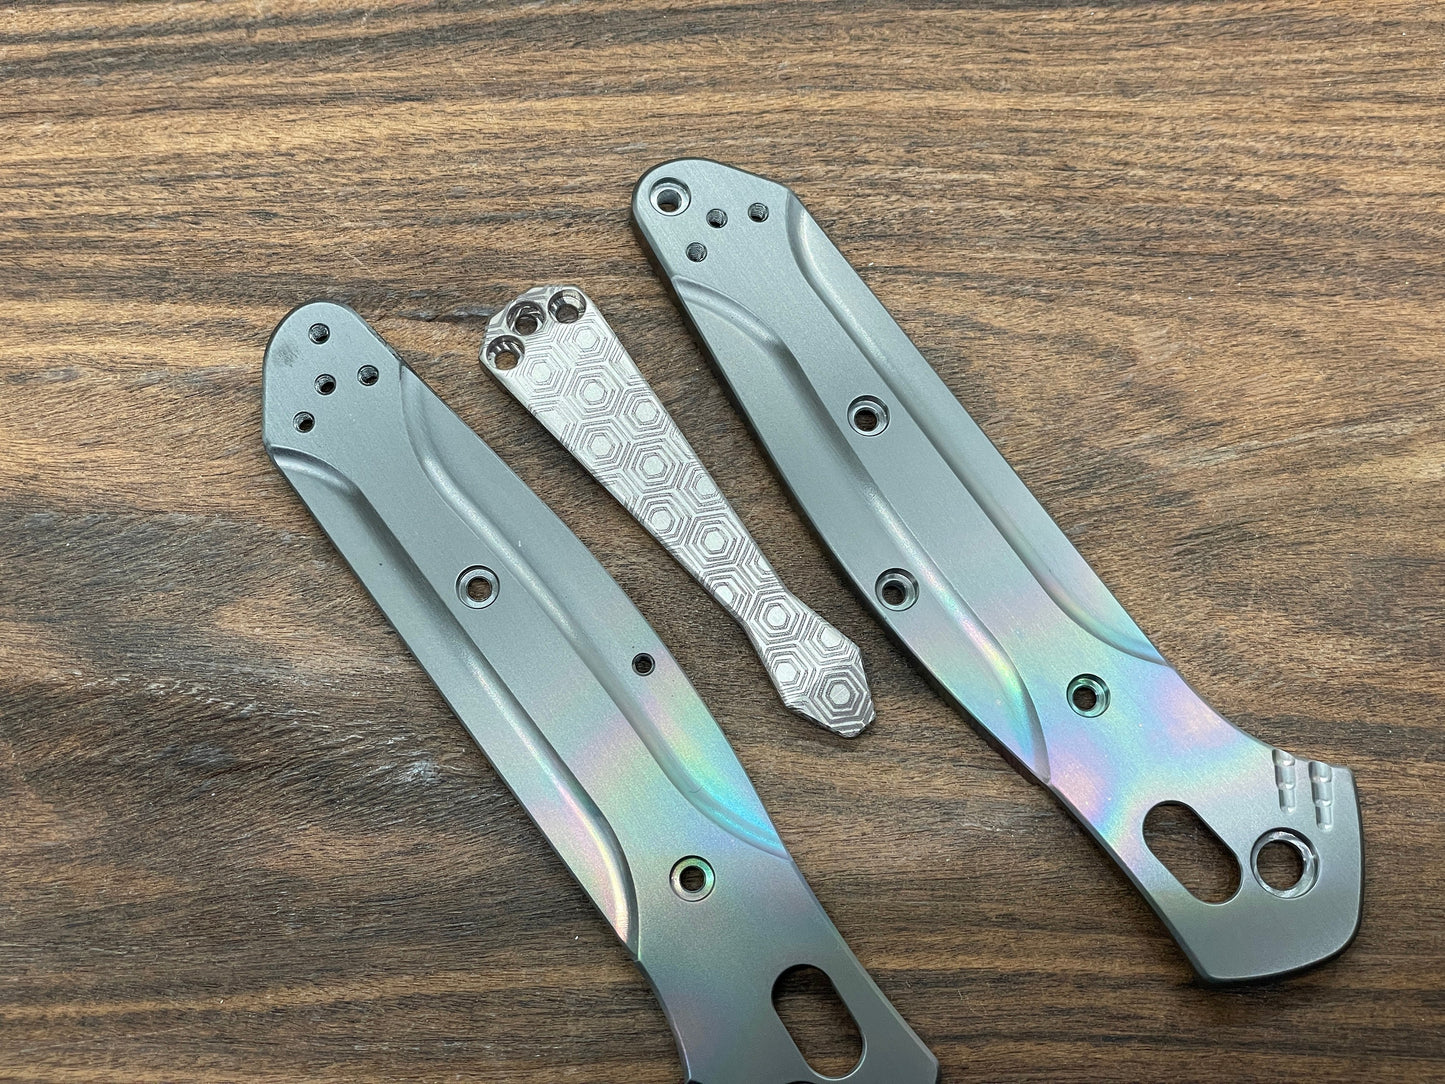 HONEYCOMB engraved Dmd Titanium CLIP for most Benchmade models